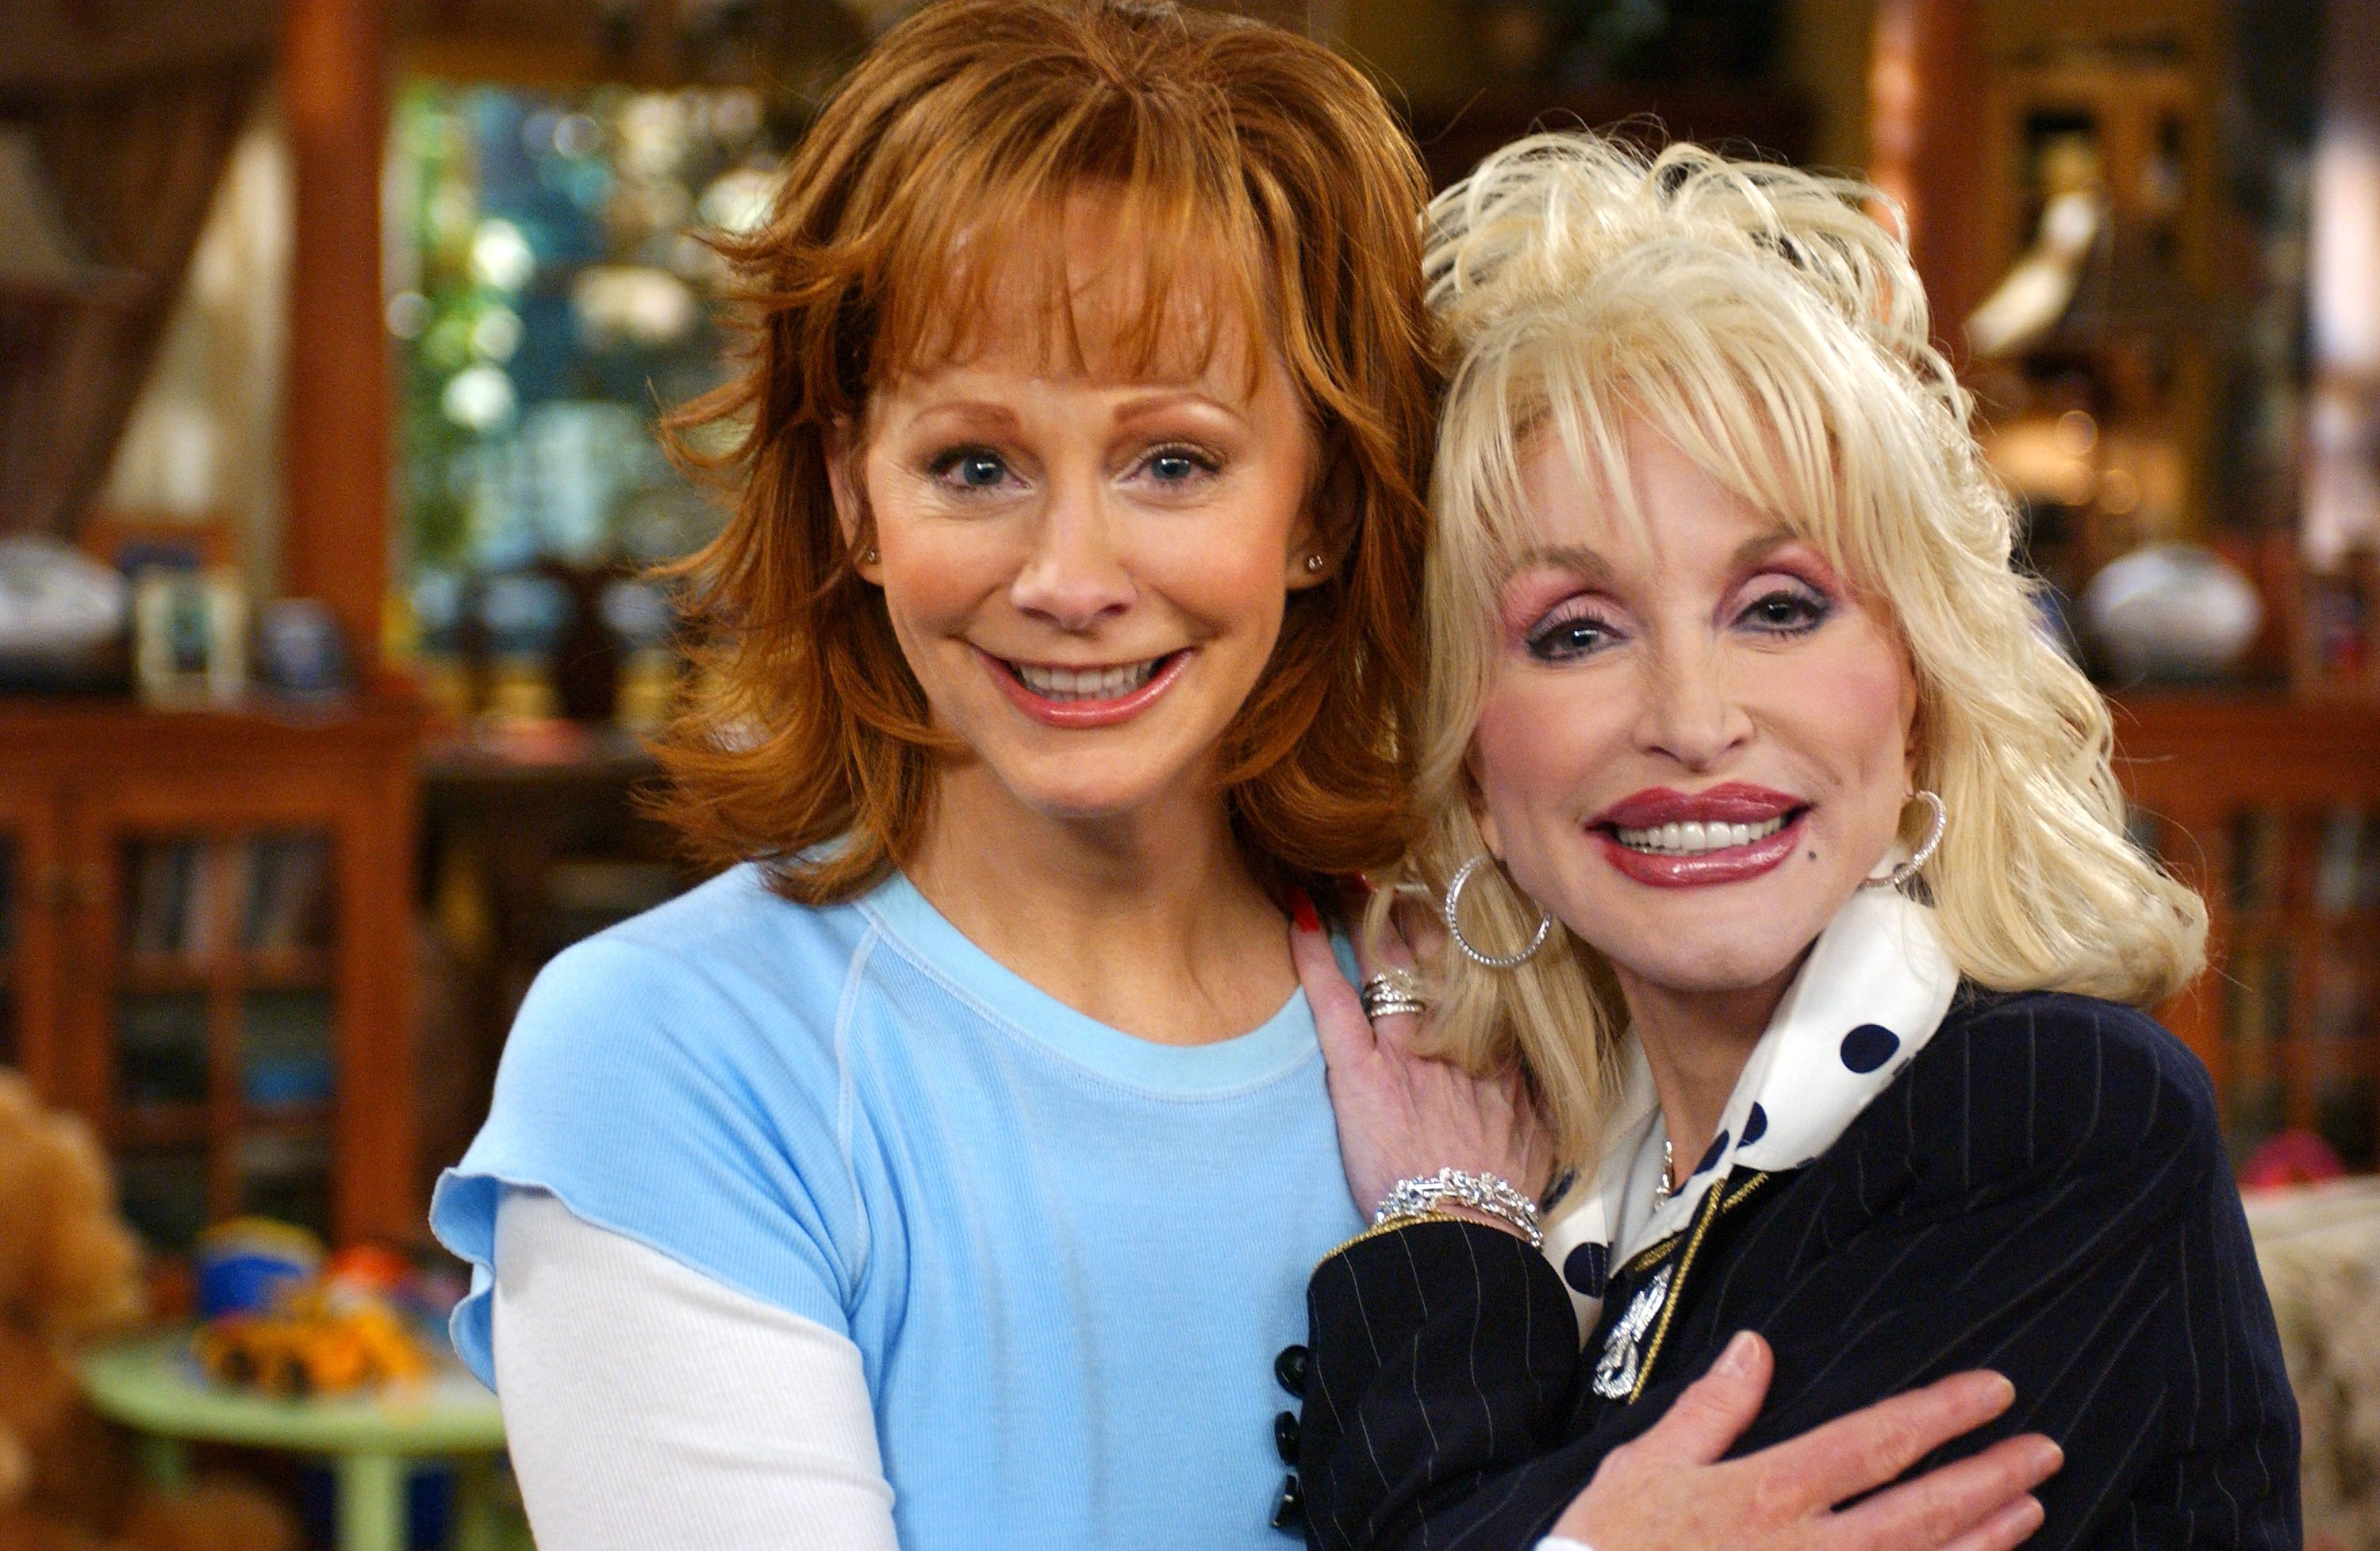 Dolly Parton and Reba McEntire: Which Country Singer Has the Higher Net  Worth?